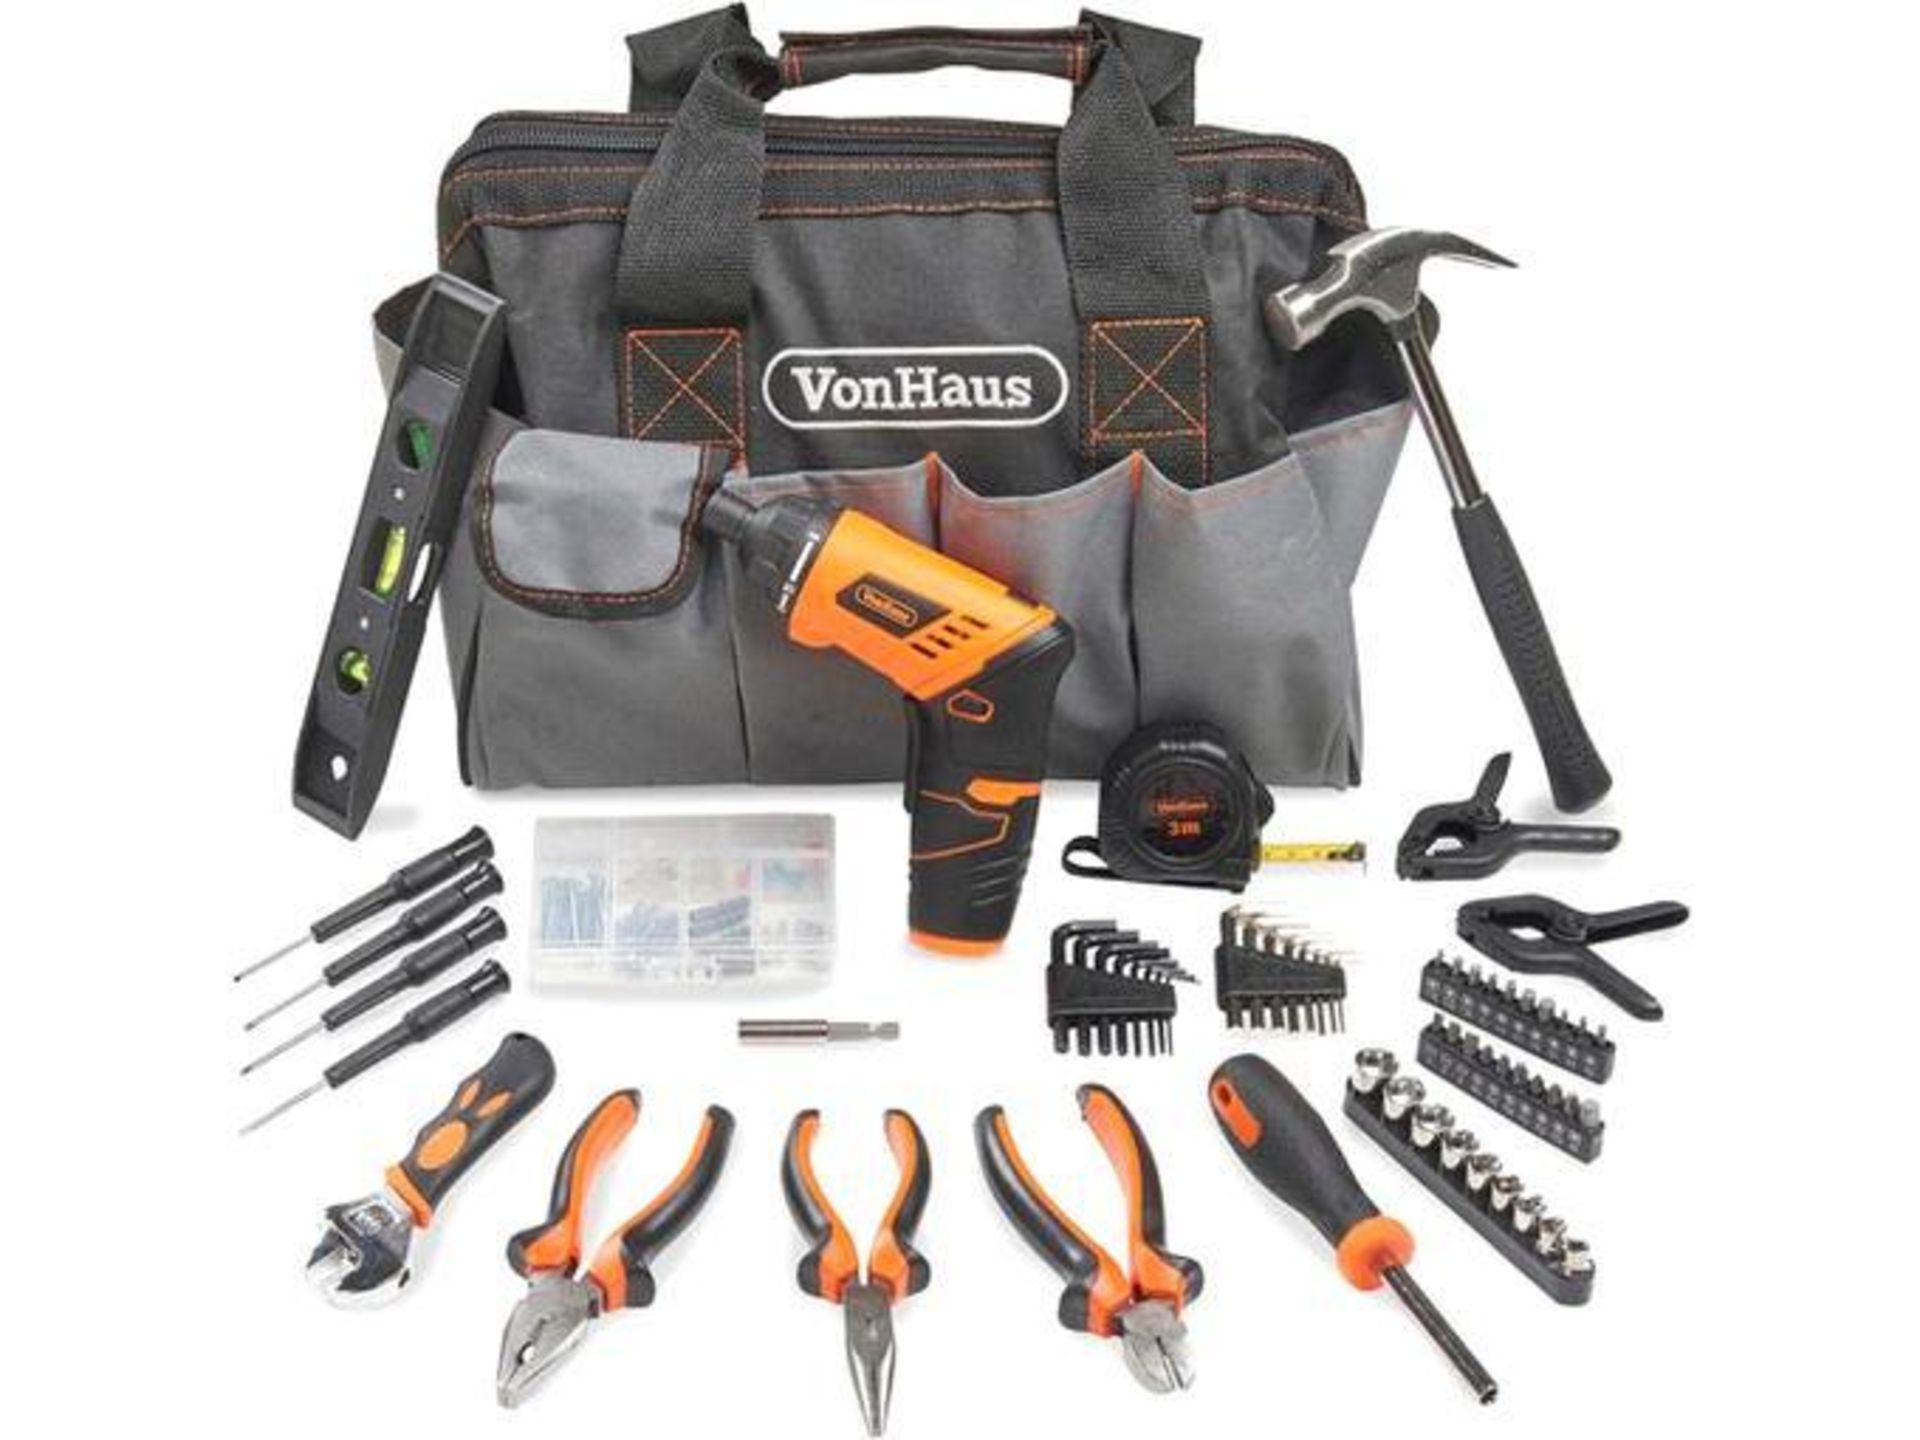 94pc Hand Tool & Screwdriver Kit (ER51) If you’re a keen DIYer, you’ll want a toolkit that won’t let